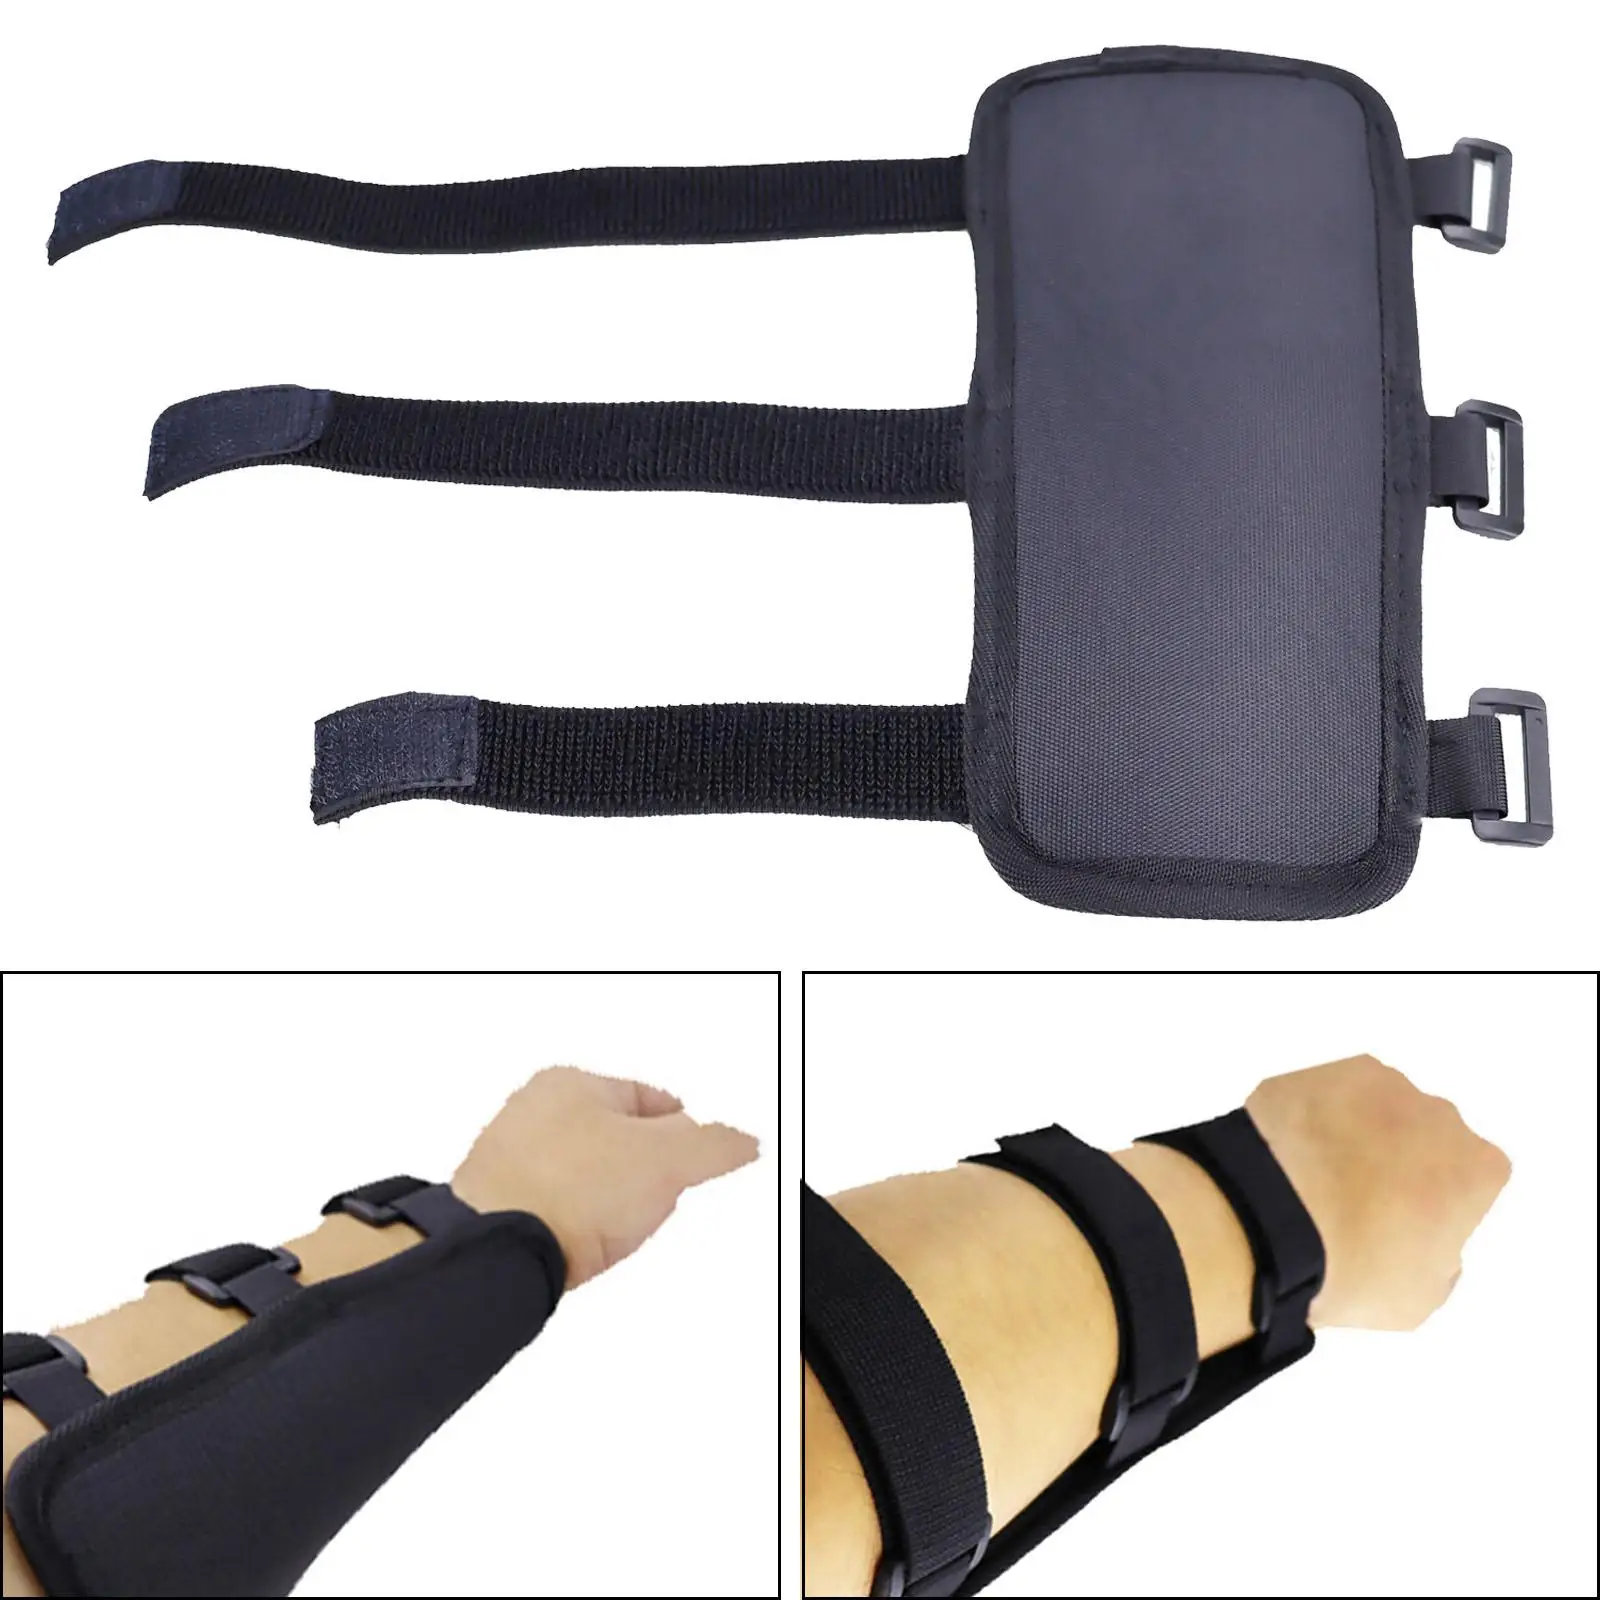 Archery Arm Guard Forearm Adjustable Elastic Strap Armguard Protector Armband for Archery Bow Shooting Women Practice Hunting